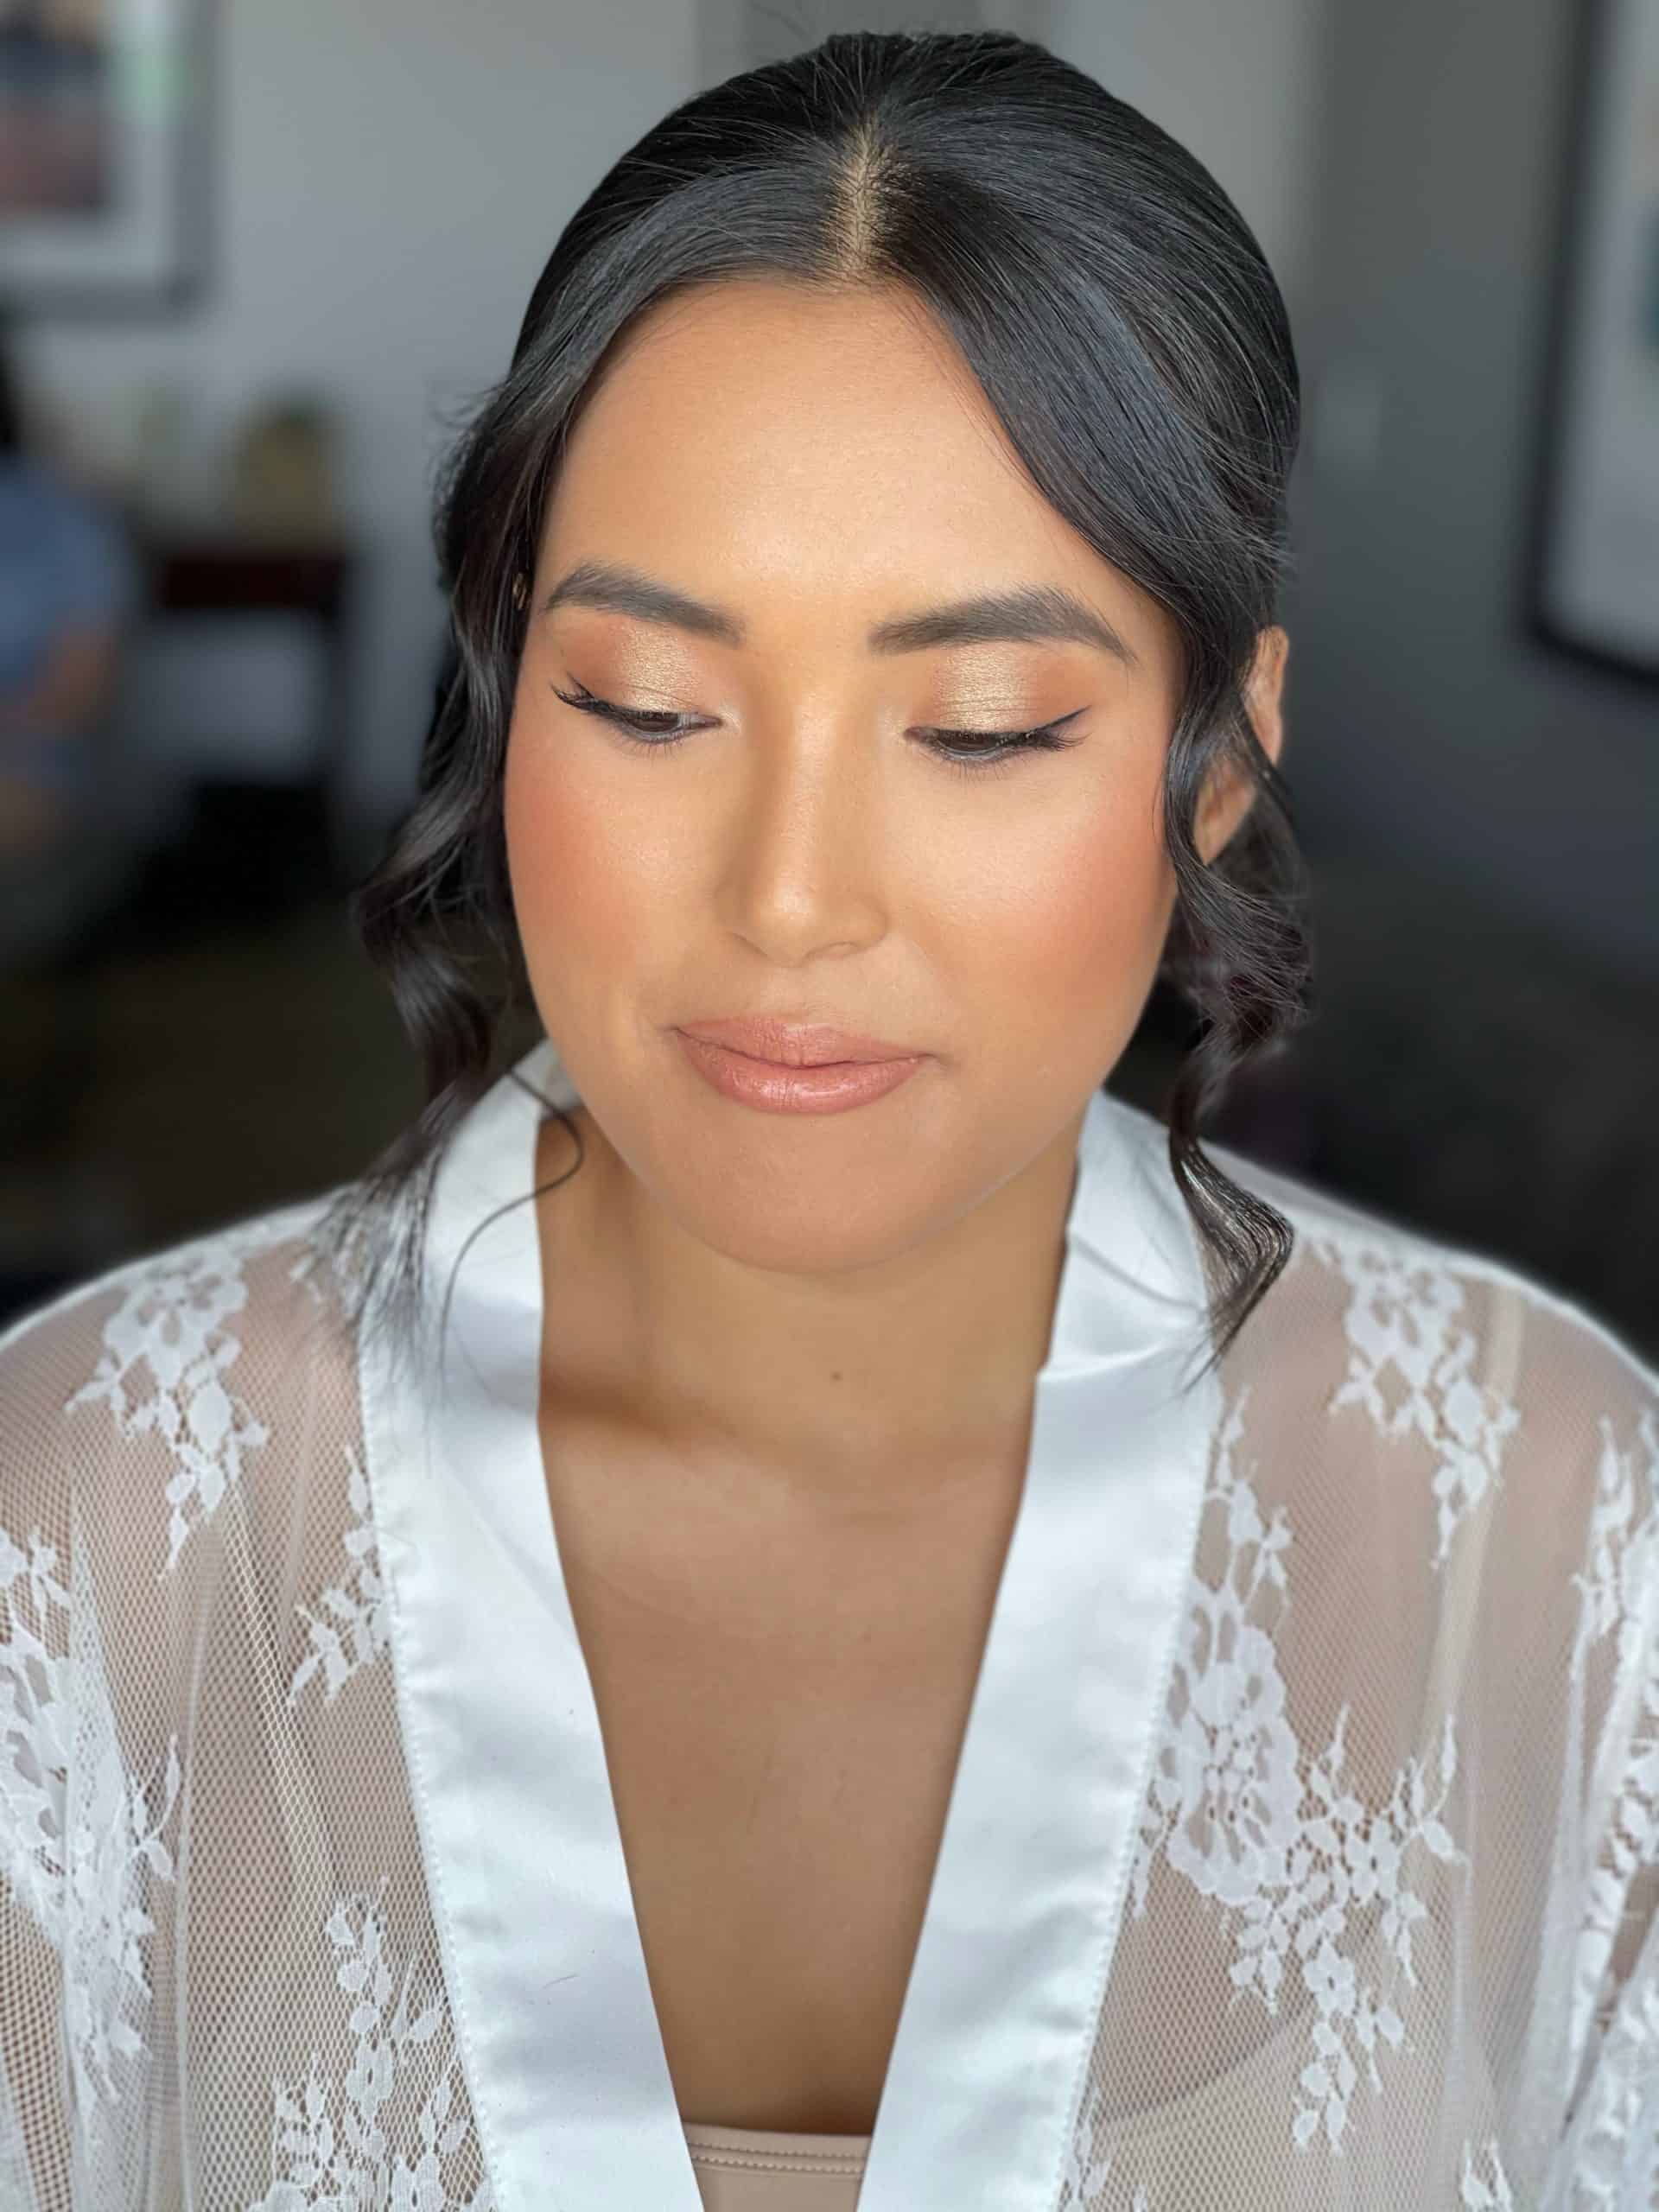 Why you should go for a Natural Look at Your Wedding